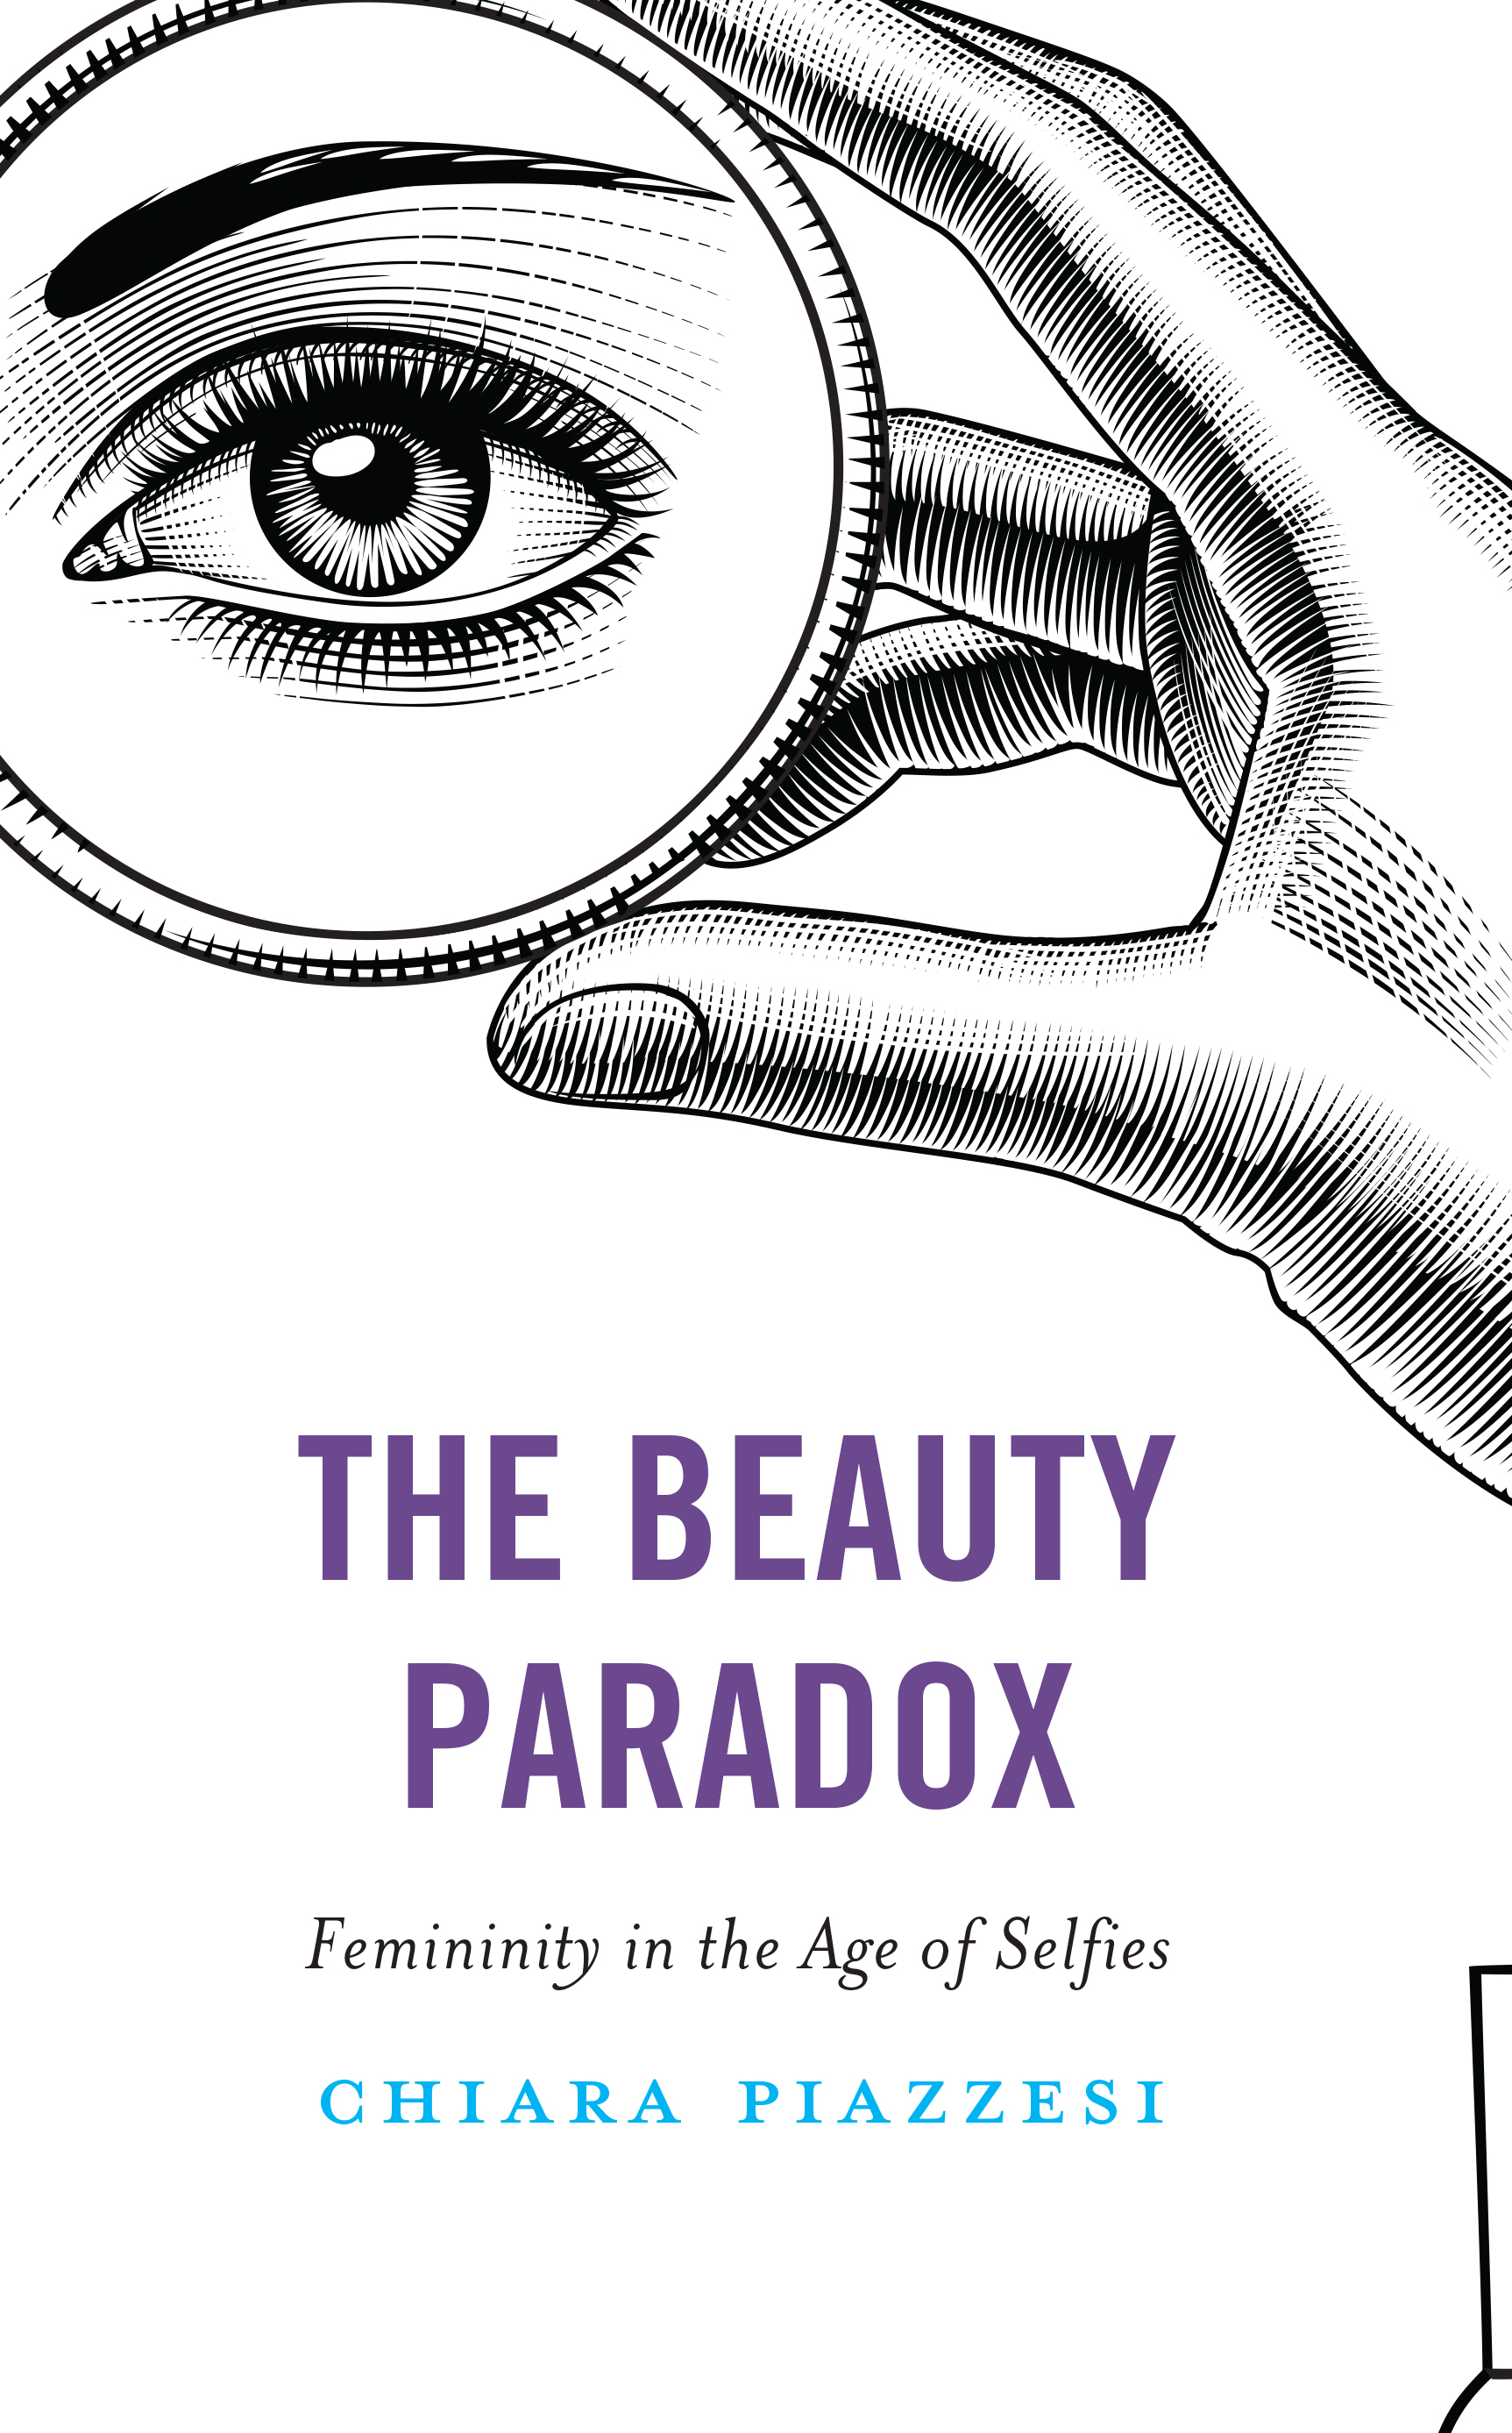 The Beauty Paradox: Femininity in the Age of Selfies